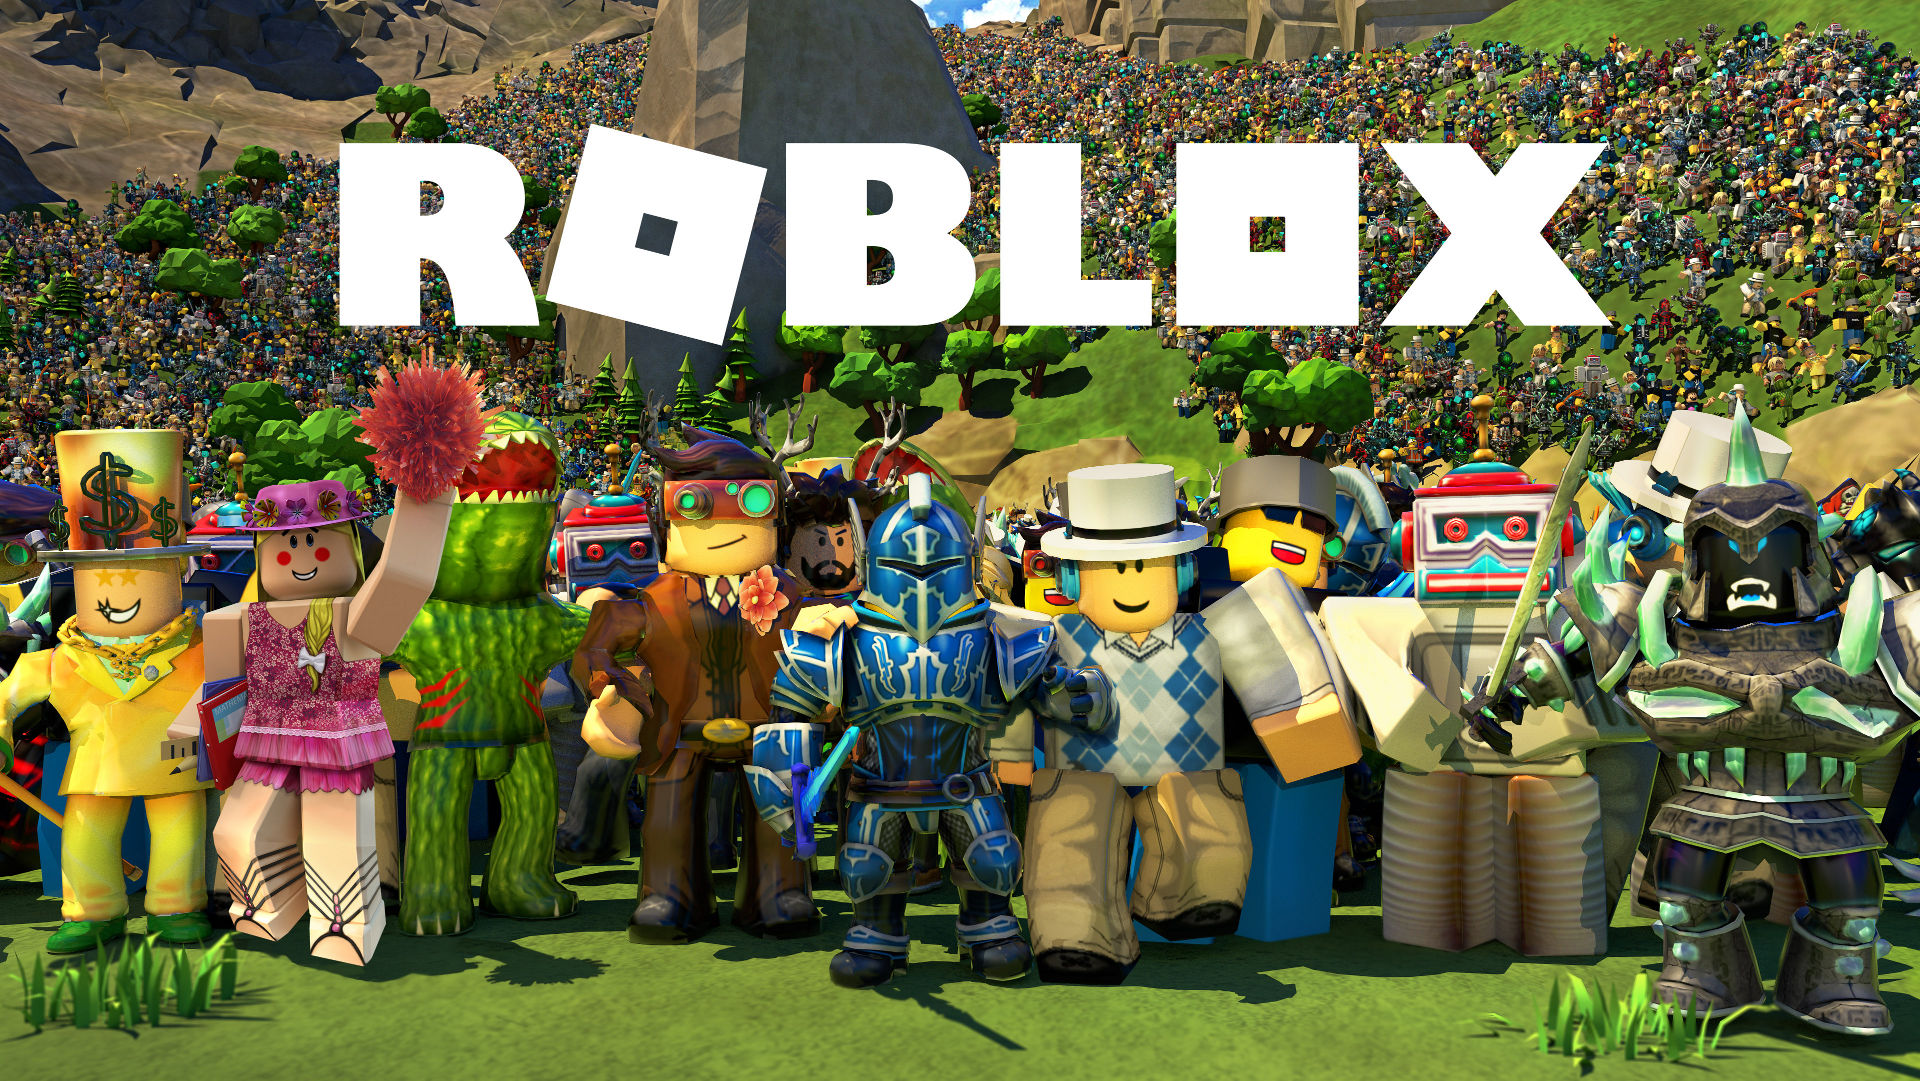 Codes For Trade Hangout Roblox